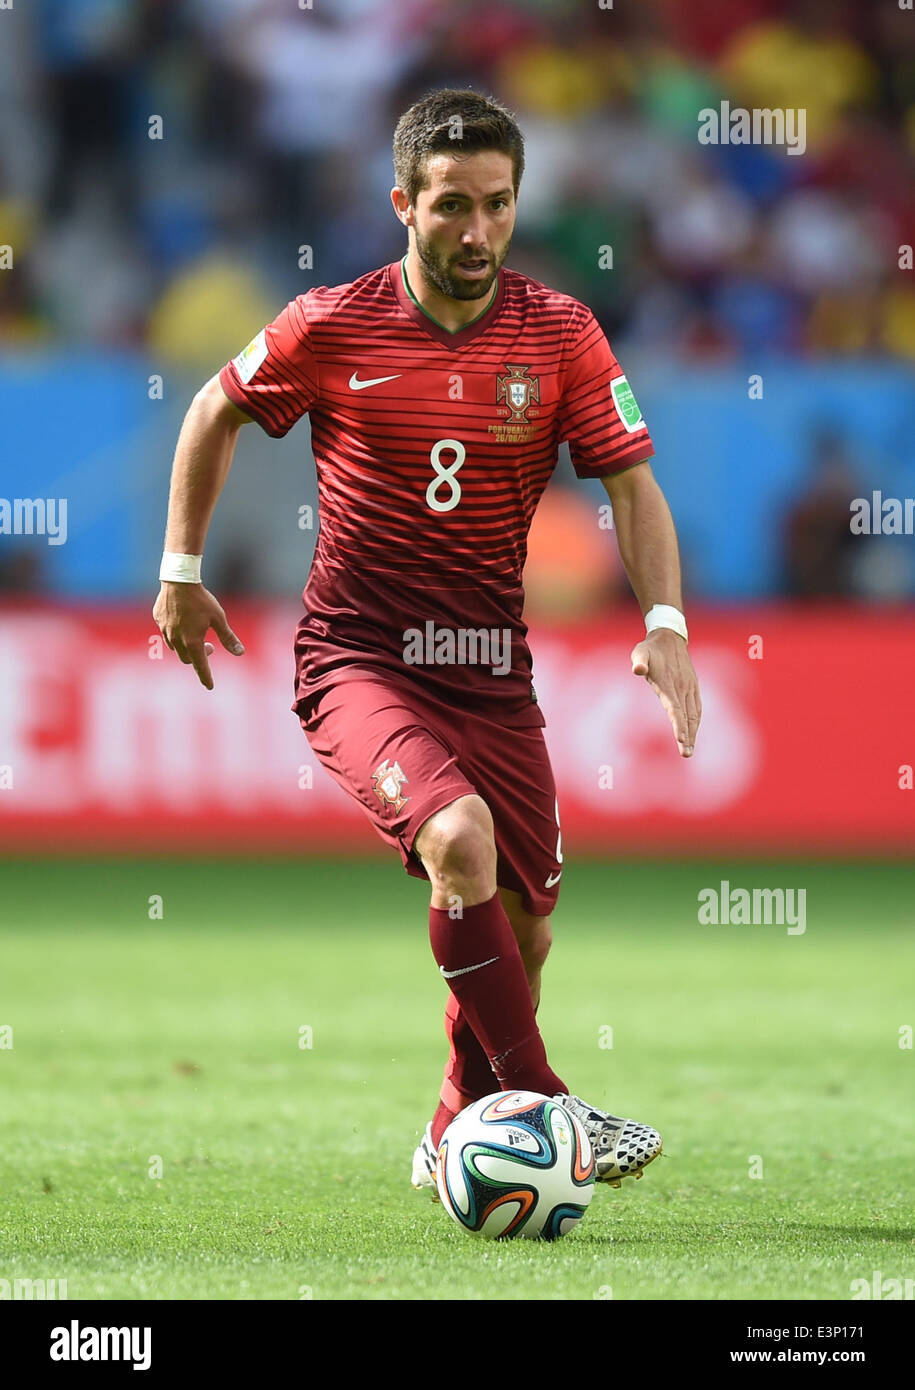 Brasilia, Brazil. 26th June, 2014. Joao Moutinho of Portugal in action during the FIFA World Cup 2014 group G preliminary round match between Portugal and Ghana at the Estadio National Stadium in Brasilia, Brazil, on 26 June 2014 Credit: © dpa picture alliance/Alamy Live News  Stock Photo